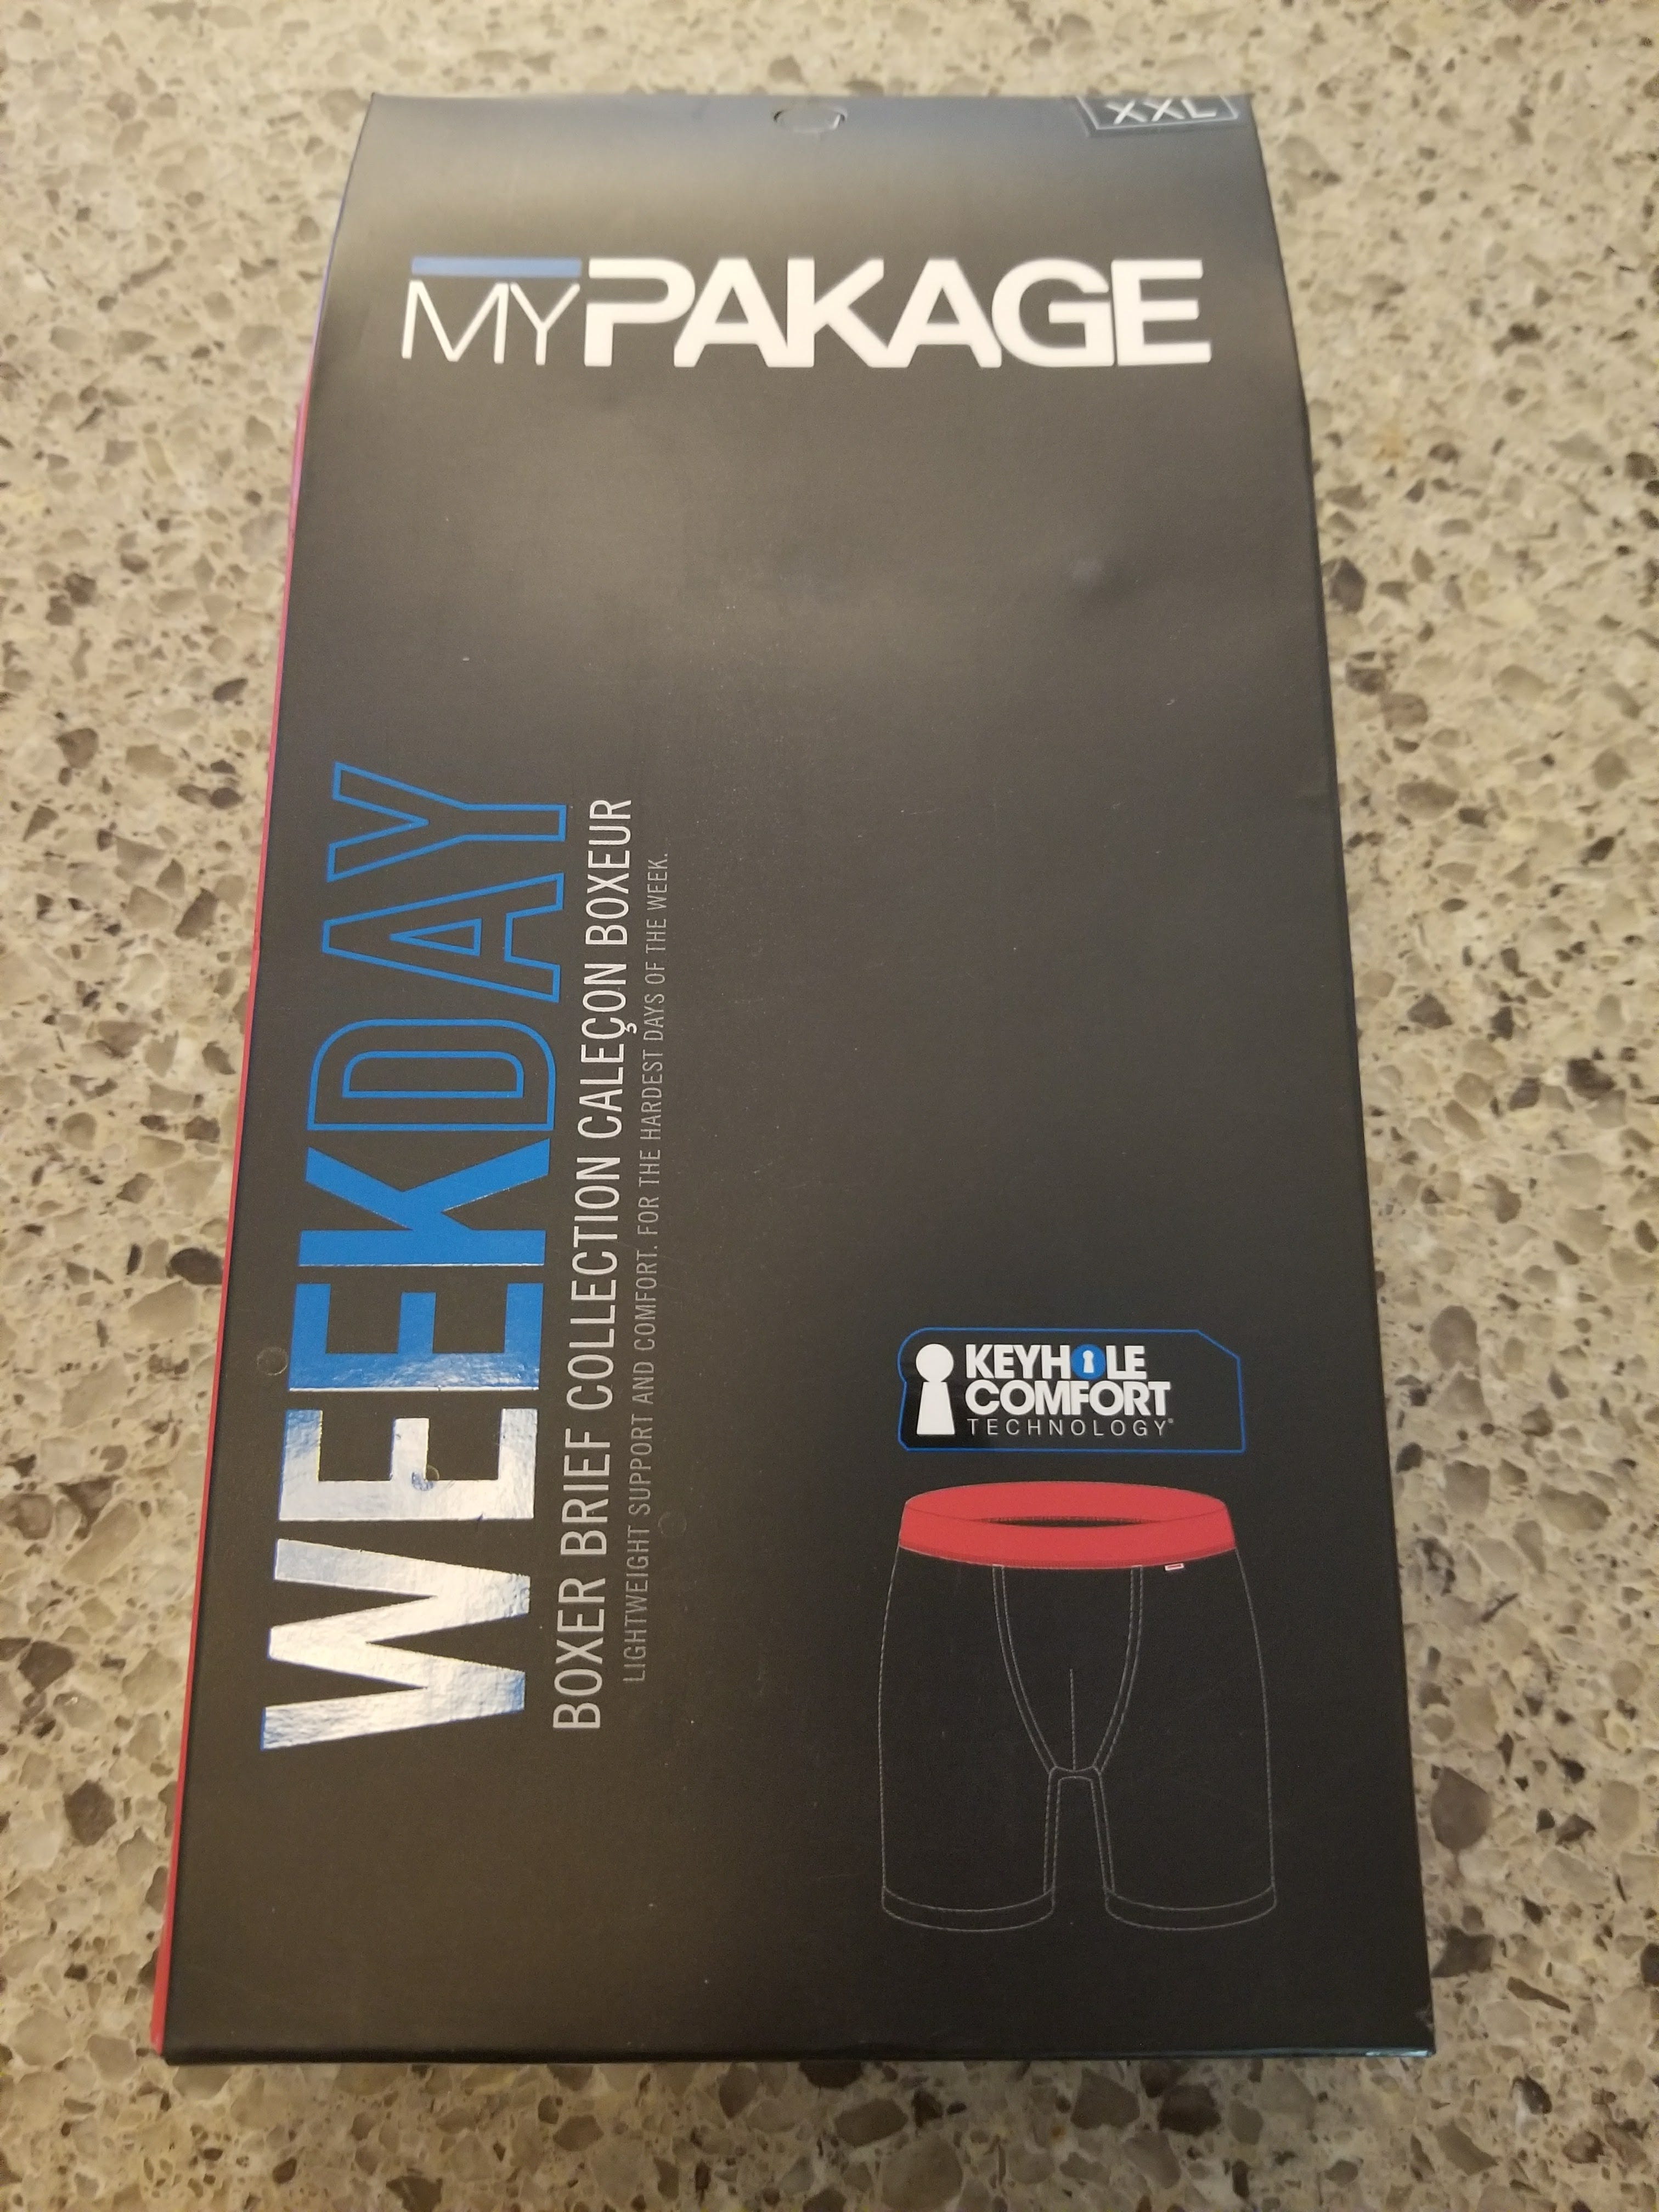 Mypakage Weekday Boxer Brief Review, by Datapotomus